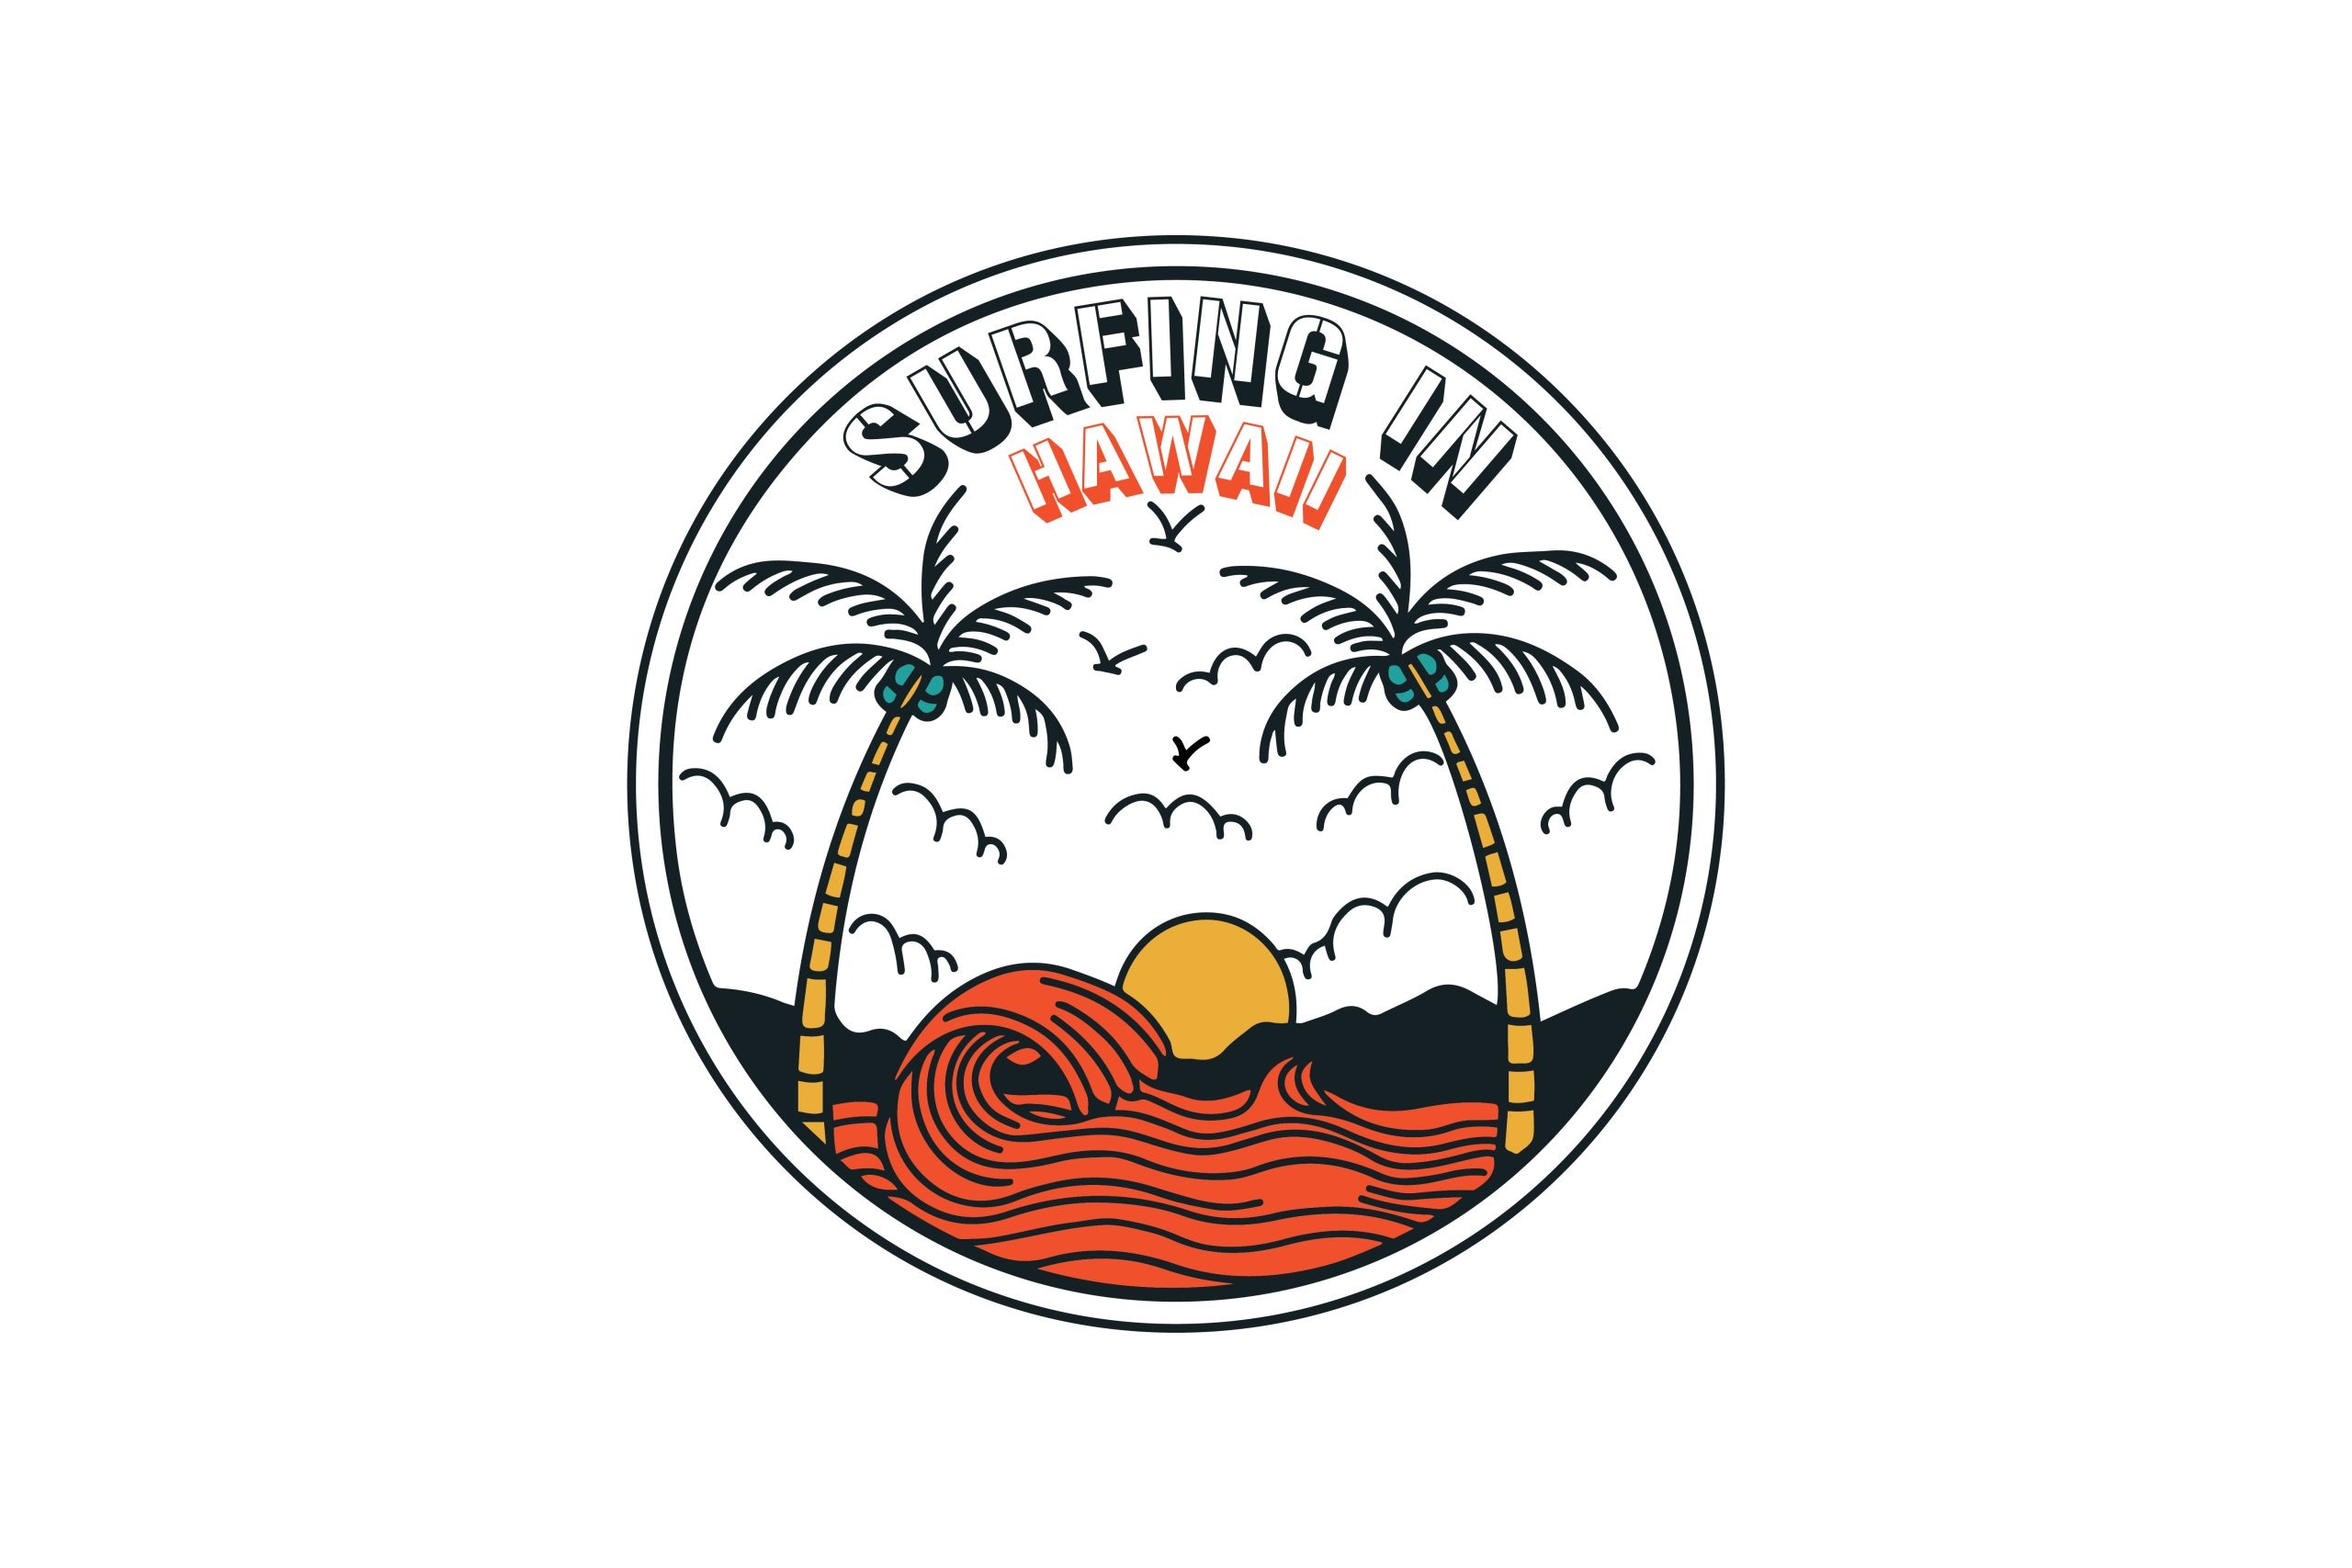 Surfing logo-free vector illustrations with palm trees